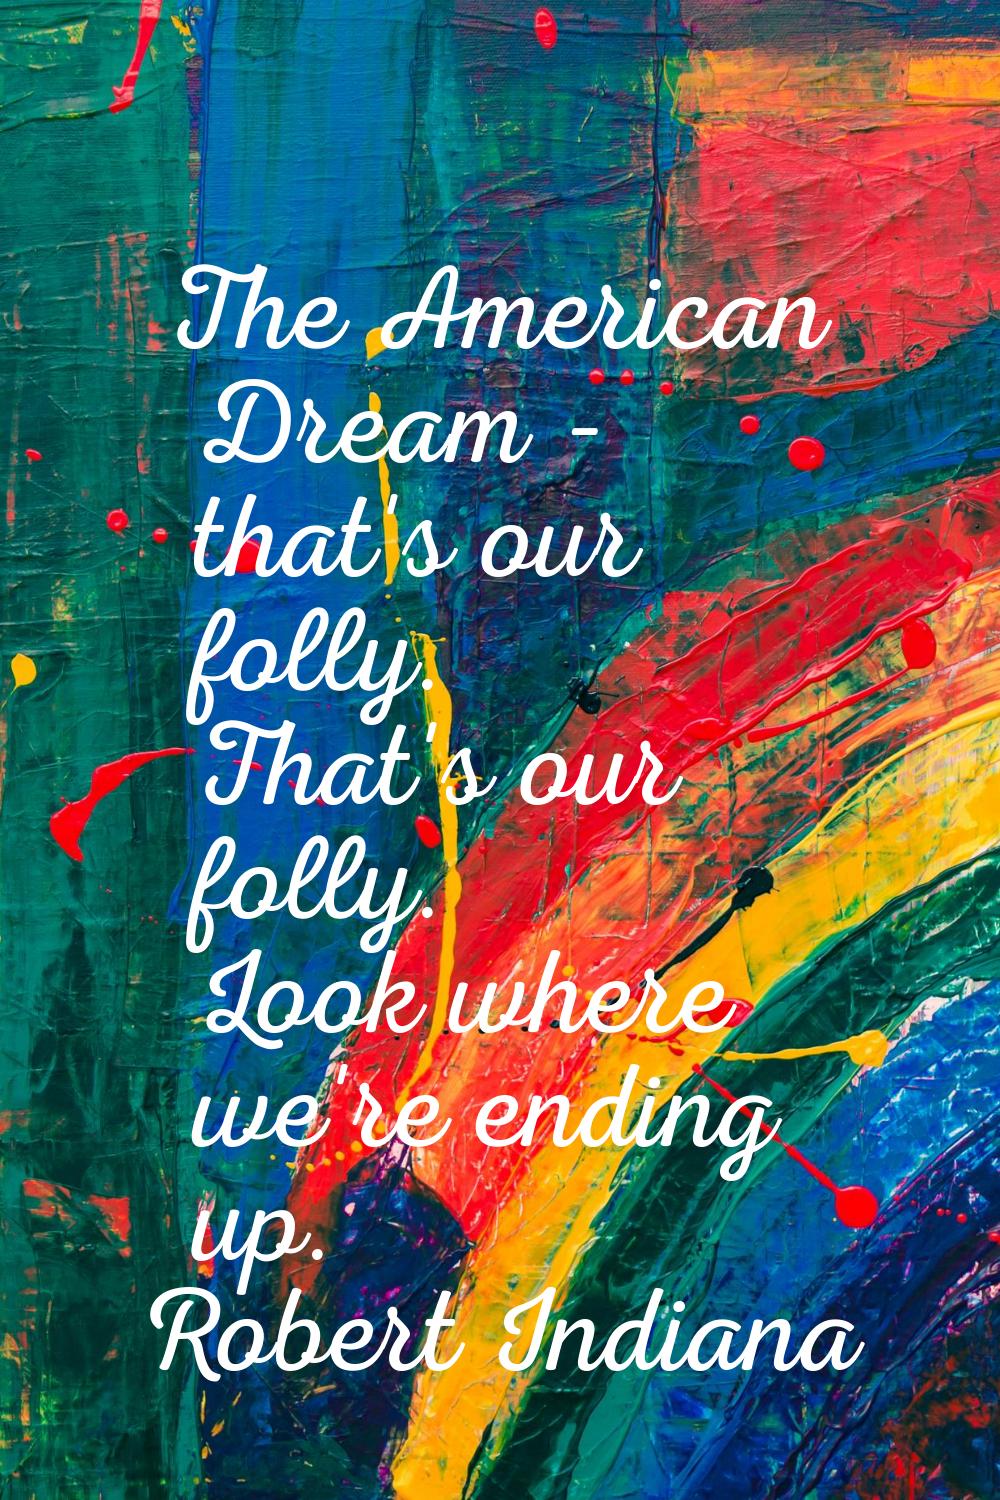 The American Dream - that's our folly. That's our folly. Look where we're ending up.